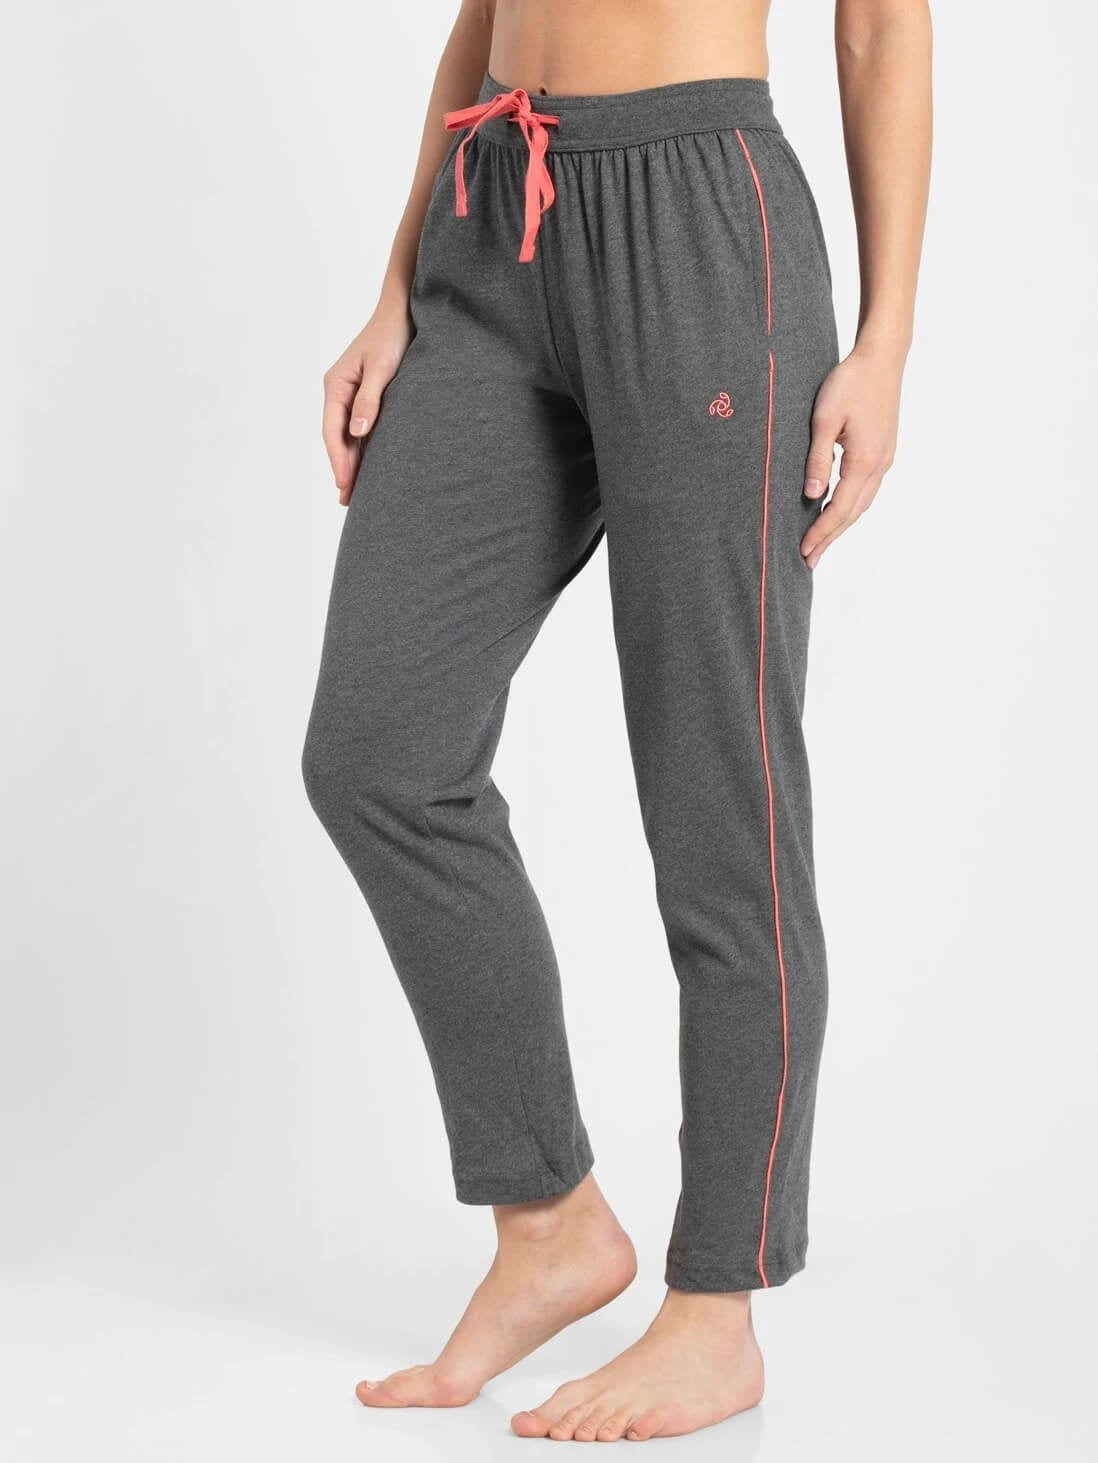 Jockey Cotton S Mens Track Pants Price Starting From Rs 1,221 | Find  Verified Sellers at Justdial